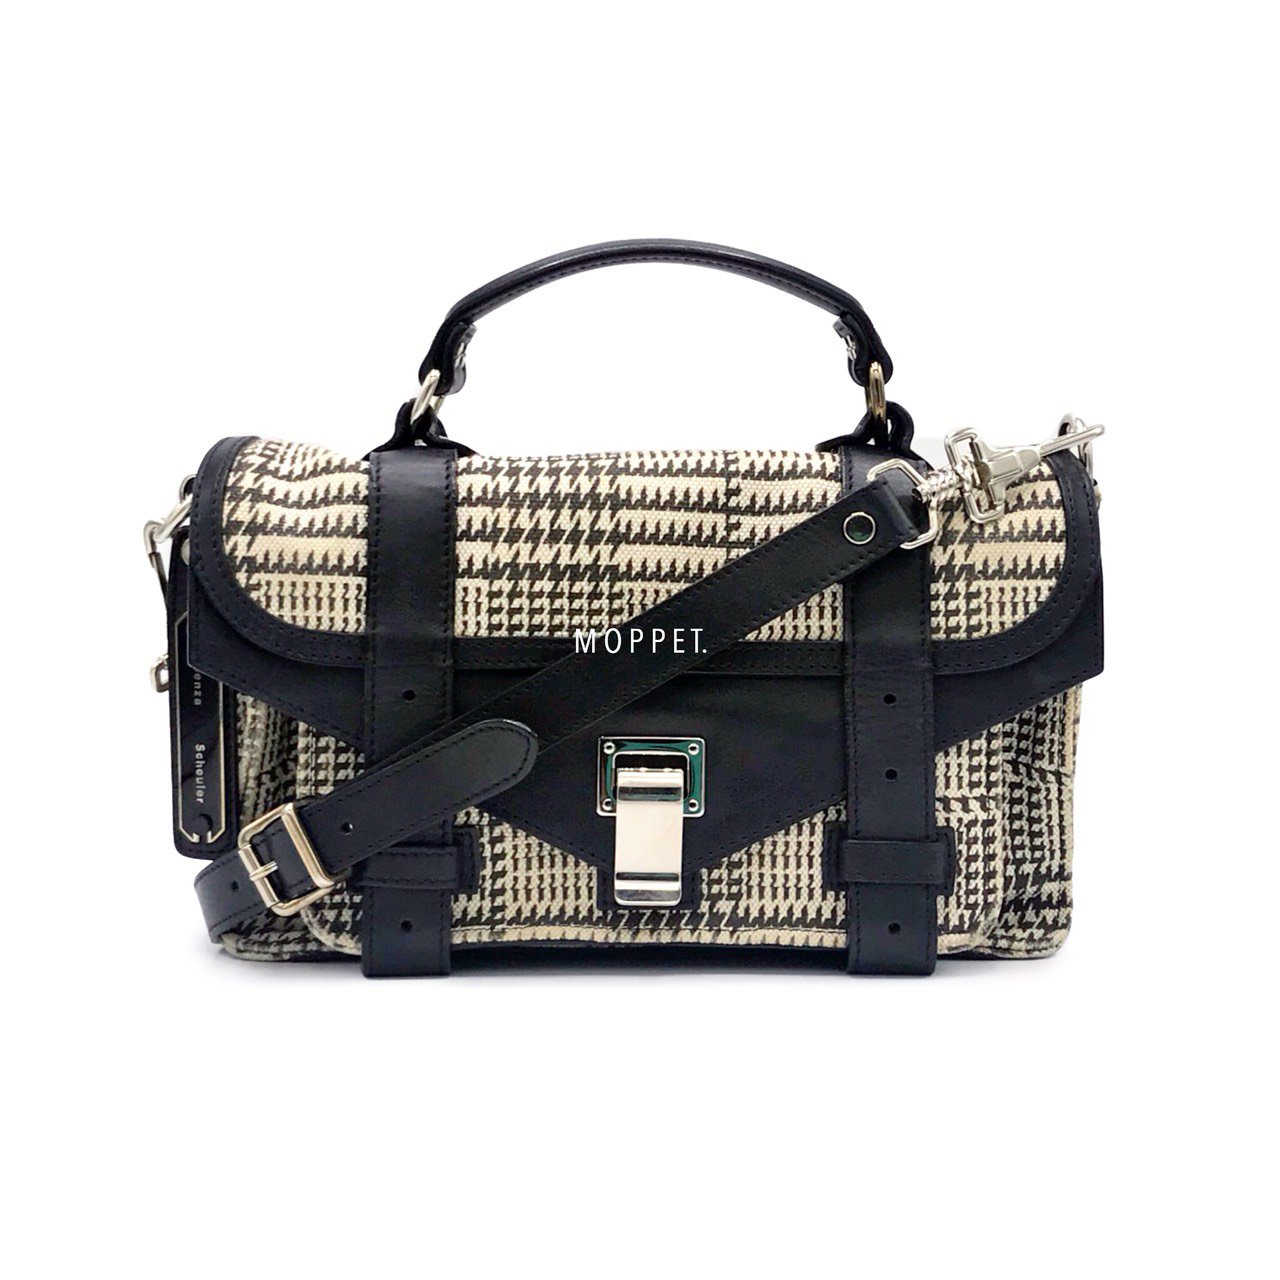 Used Proenza Schouler PS1 Tiny in Houndstooth SHW